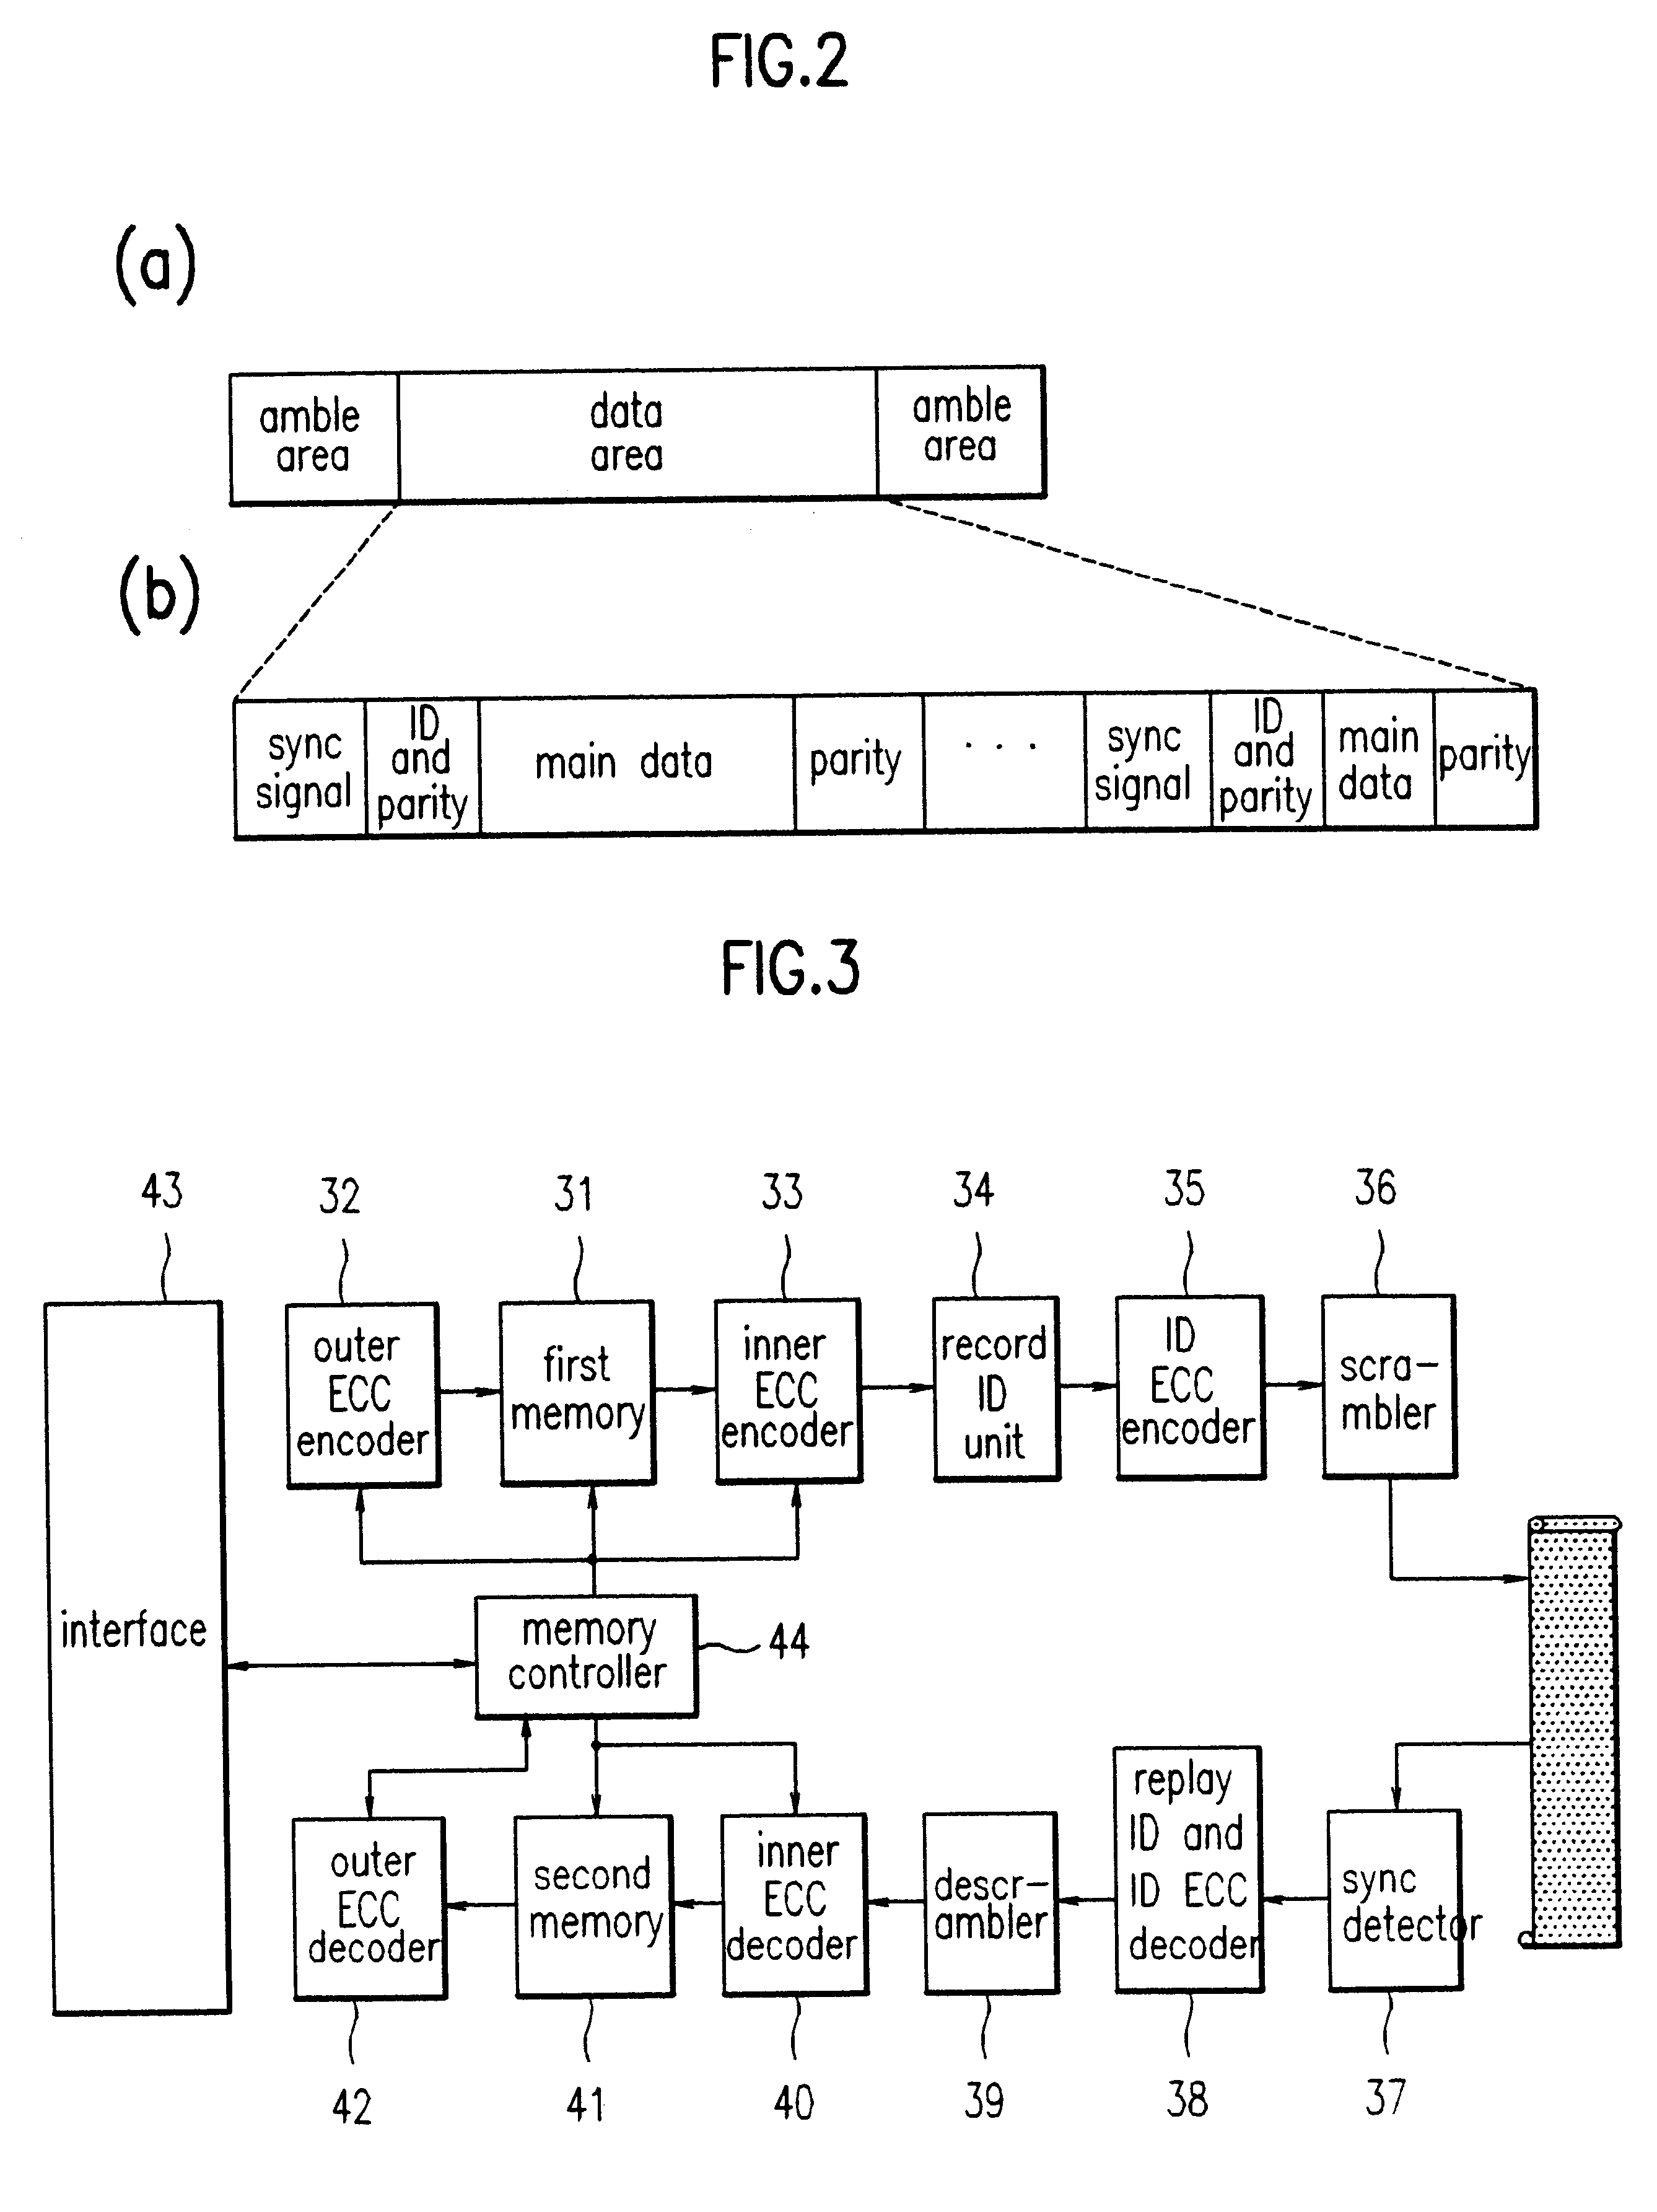 Apparatus for detecting a synchronization signal in a digital data record/replay device